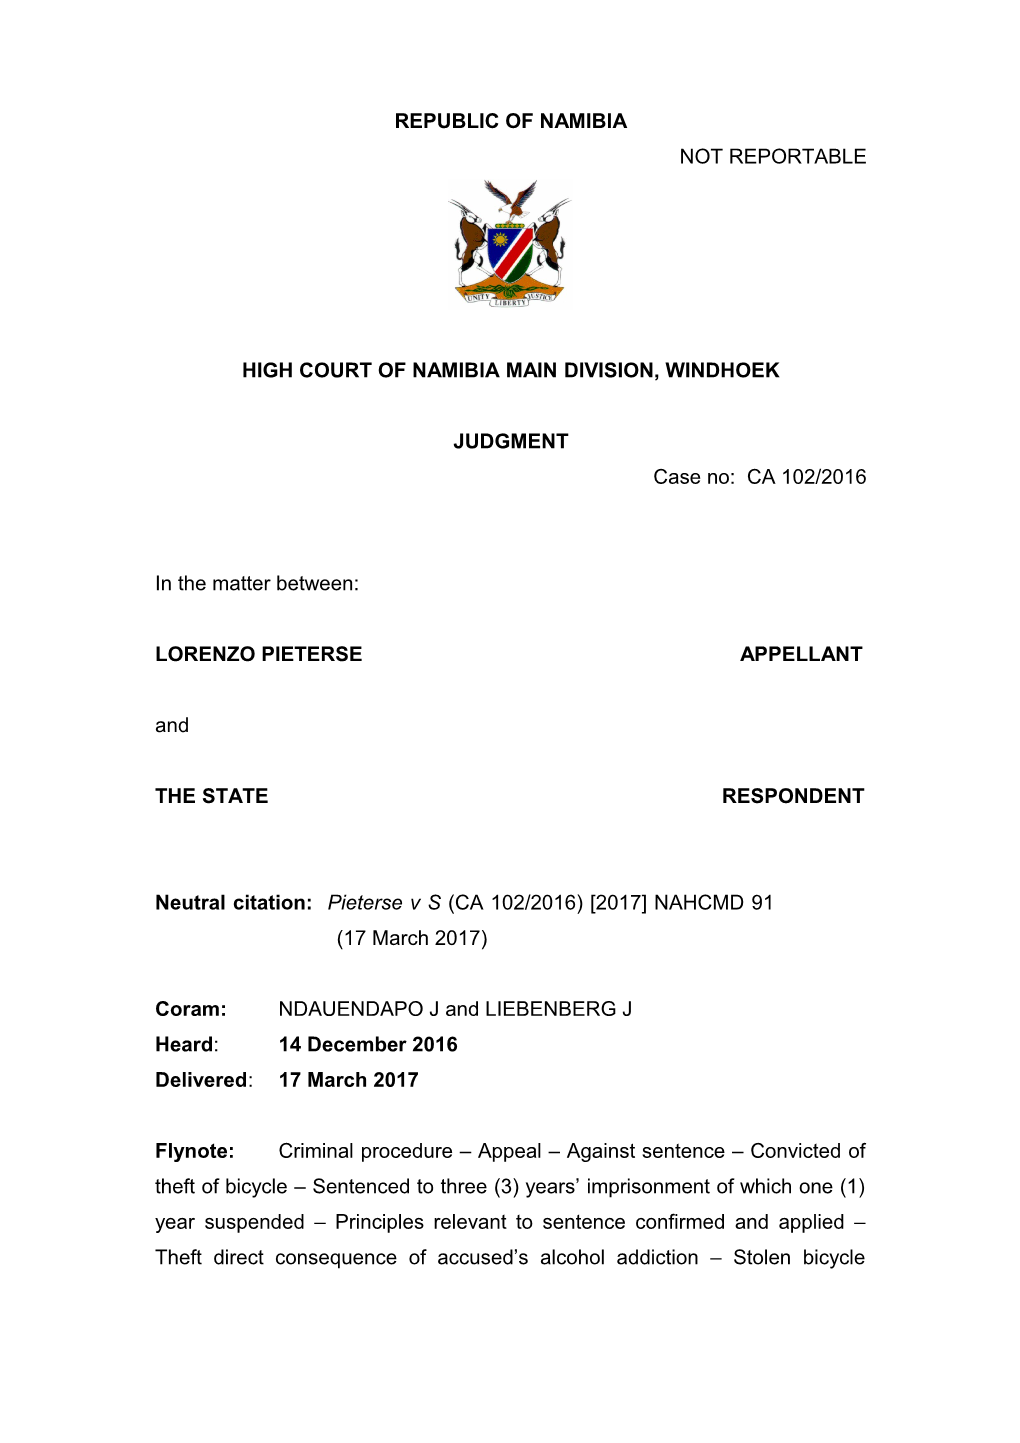 High Court of Namibia Main Division, Windhoek s25